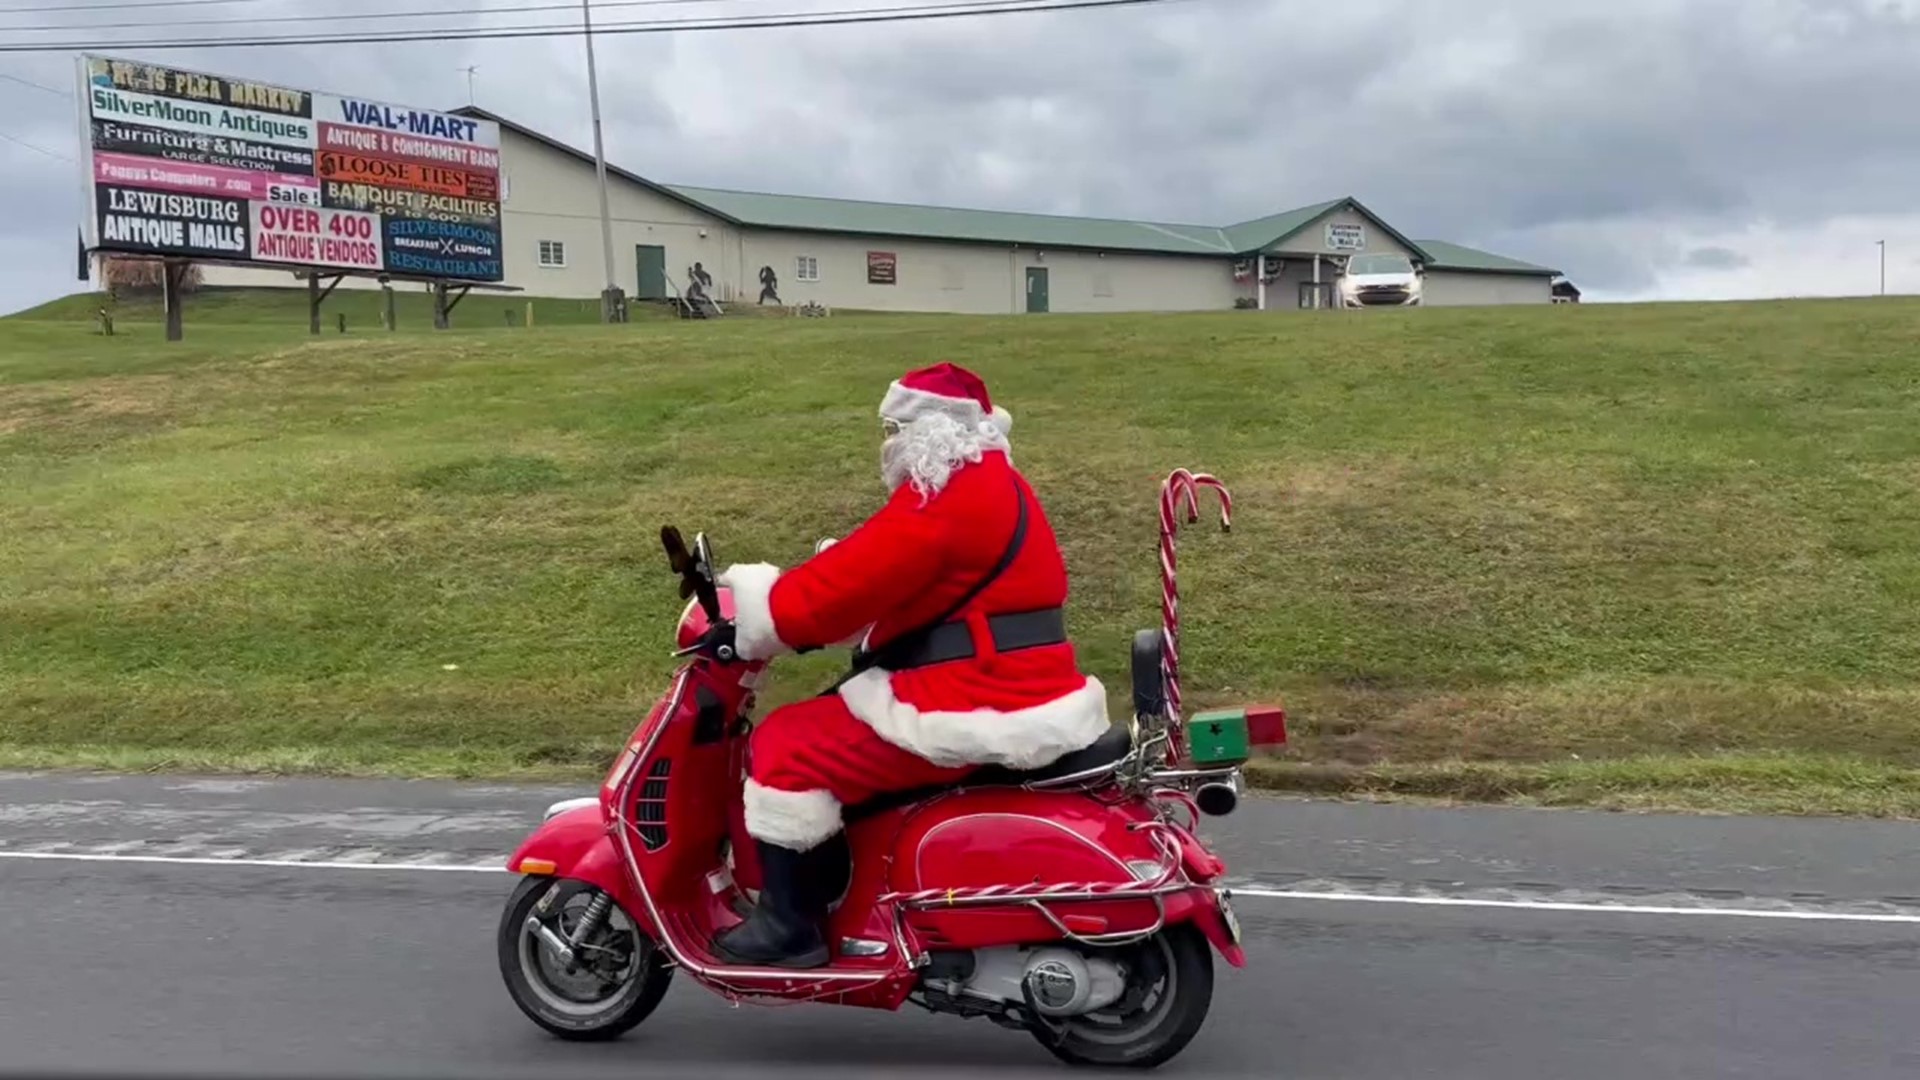 Some of Santa's helpers have been busy spreading cheer in central Pennsylvania and they are hard to miss, as they are riding around on scooters!